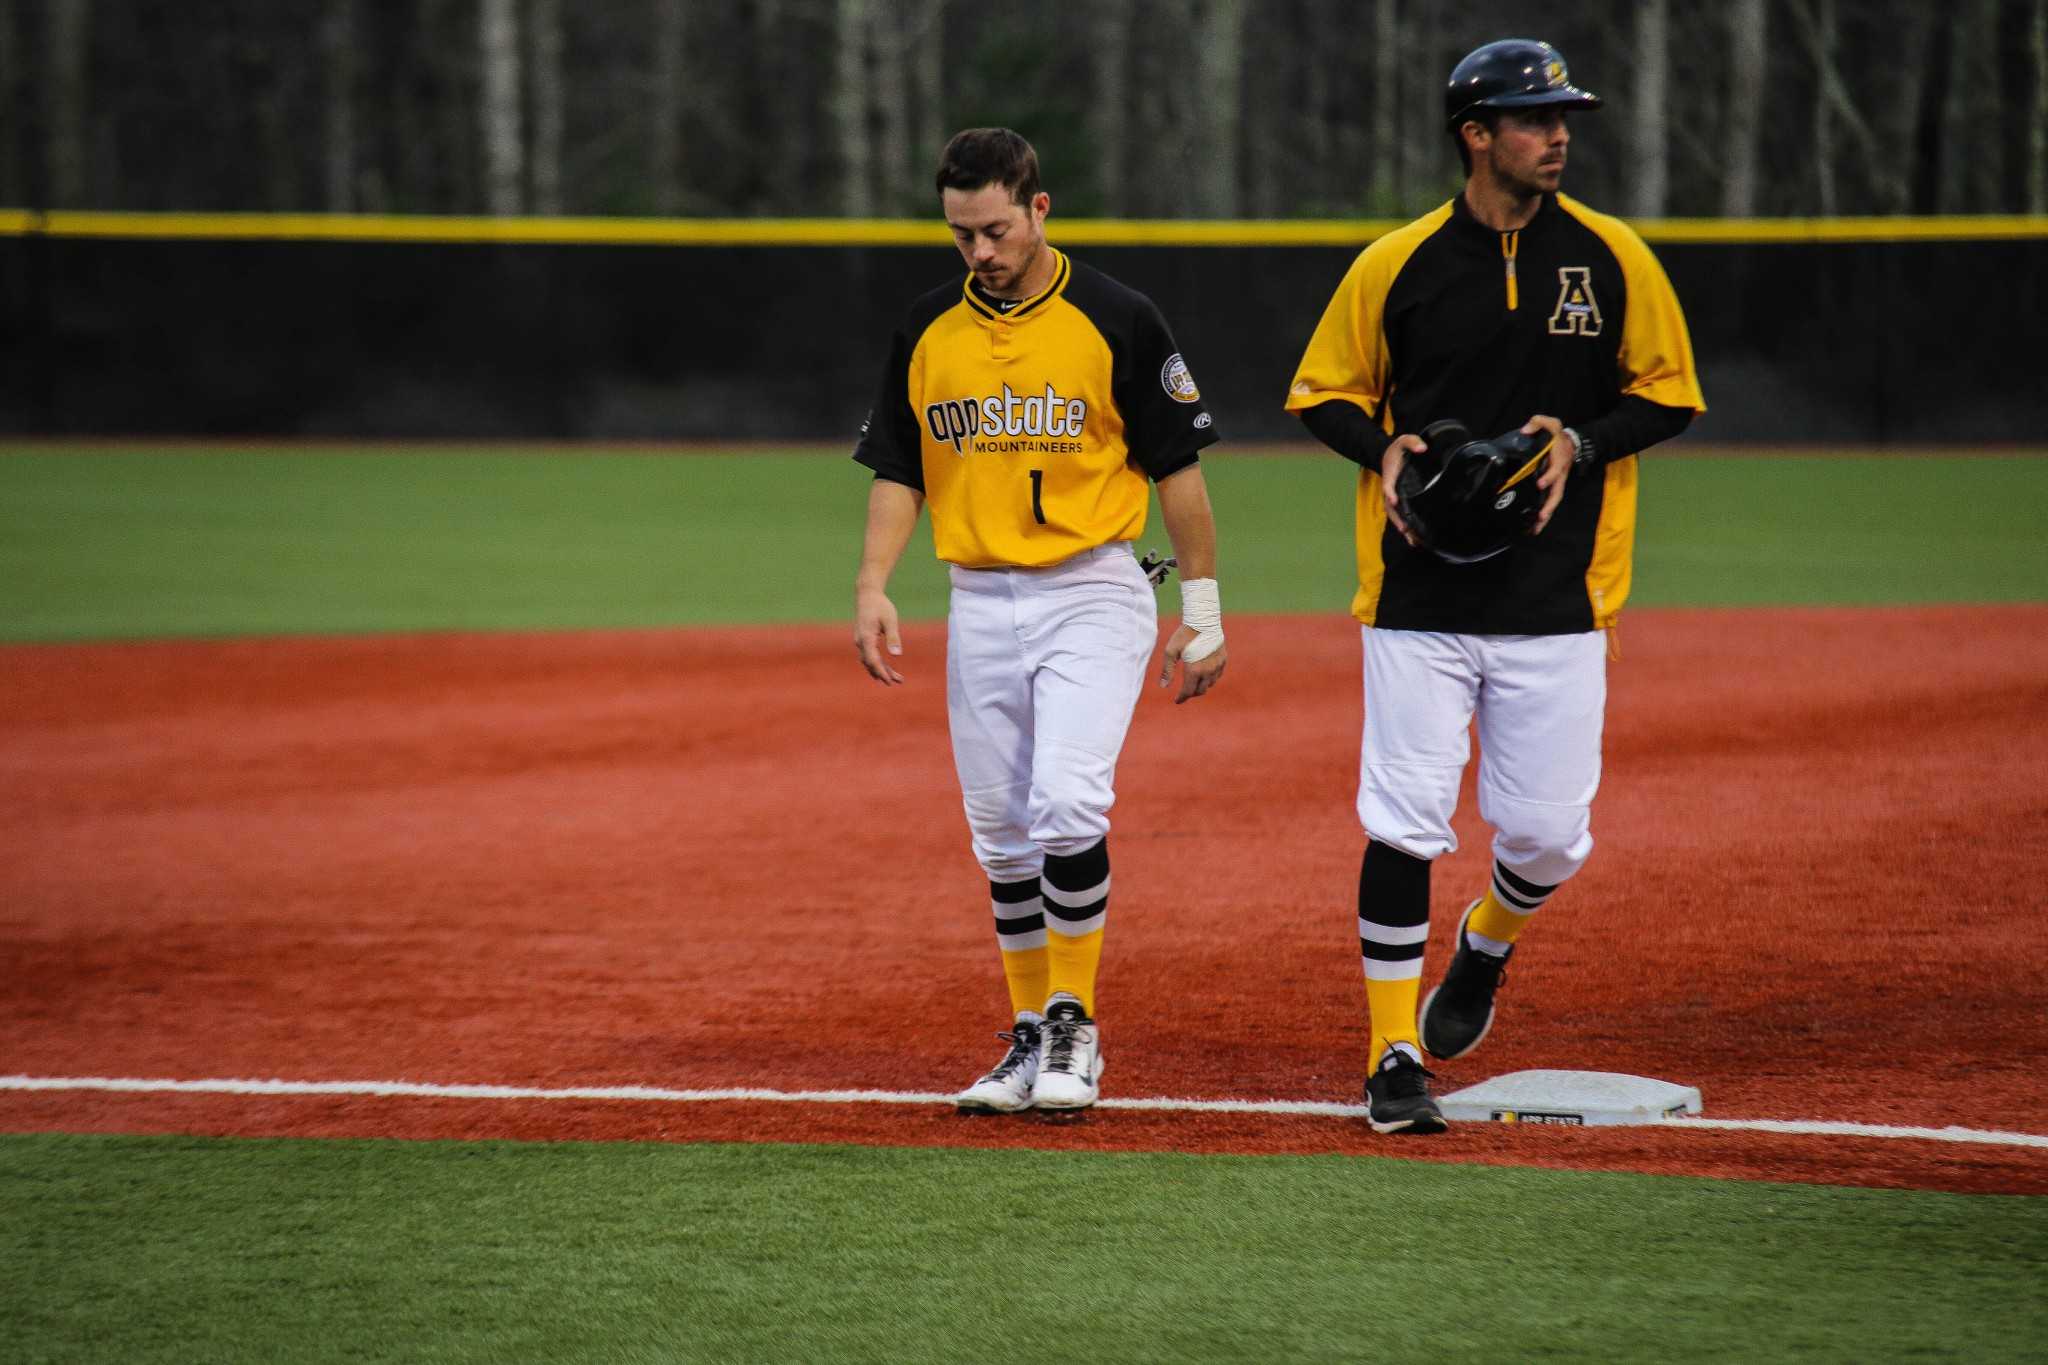 Junior outfielder Brandon Burris (left) walks off the field during App States series opener against Georgia State. The Mountaineers had multiple defensive errors that resulted in a 4-3 loss in 12 innings. Photo: Gerrit Van Genderen | The Appalachian